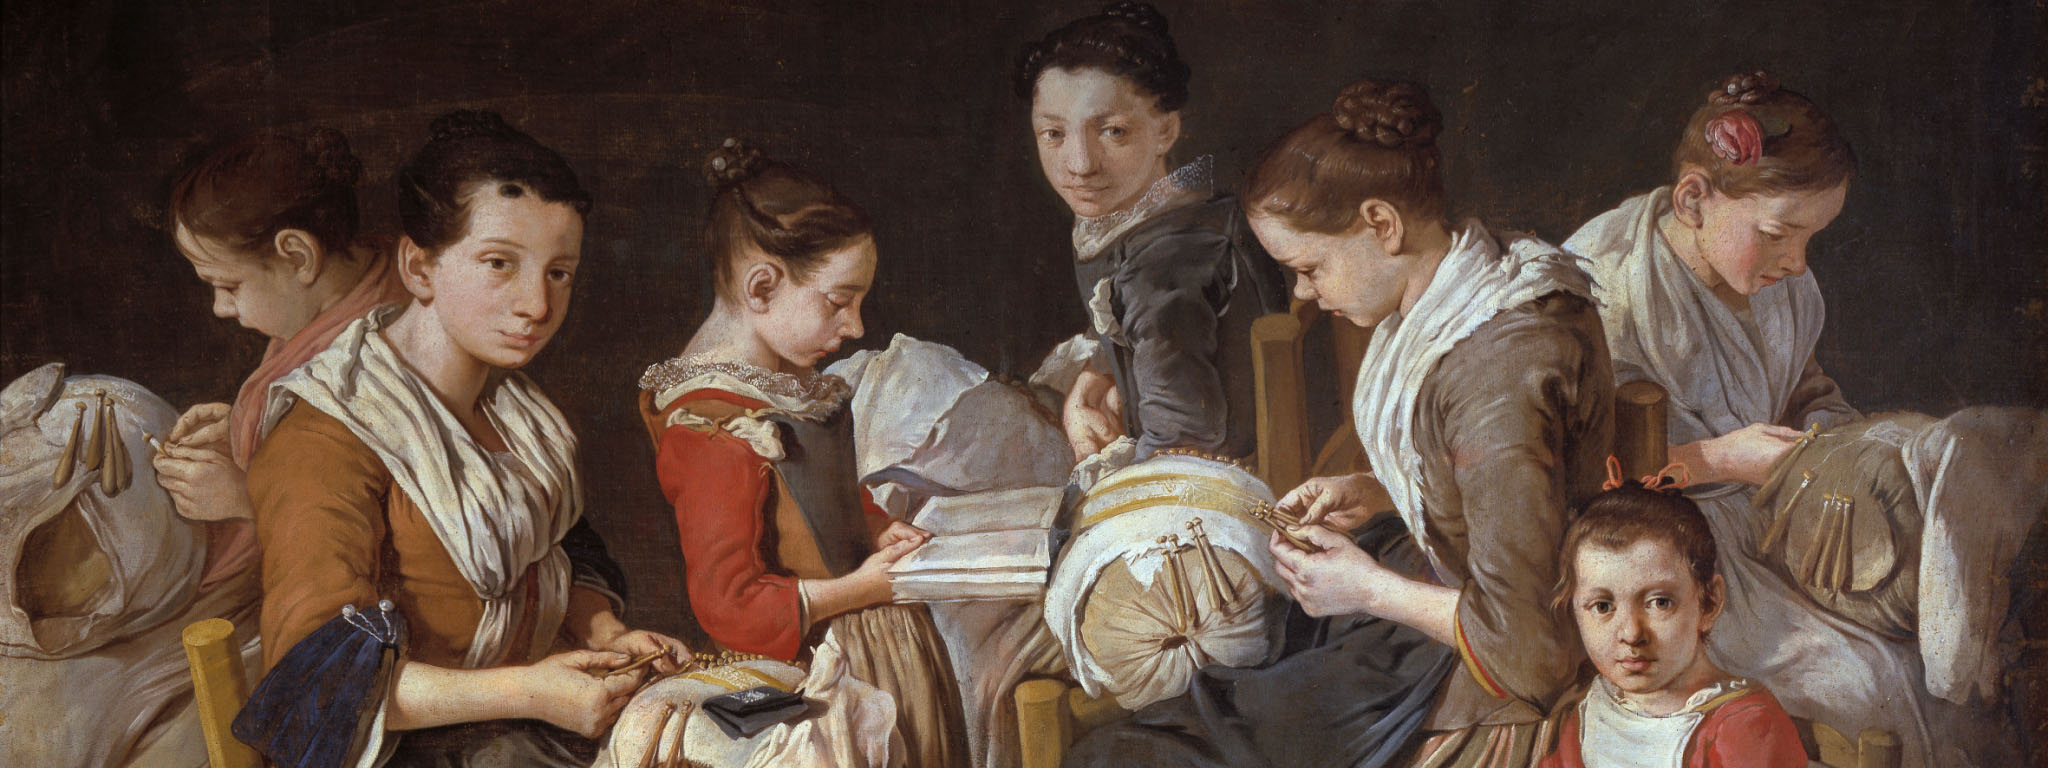 Women Working on Pillow Lace (The Sewing School) (detail), about 1720-1725, Giacomo Ceruti. Oil on canvas. Private Collection. Photo: © Fotostudio Rapuzzi, Brescia